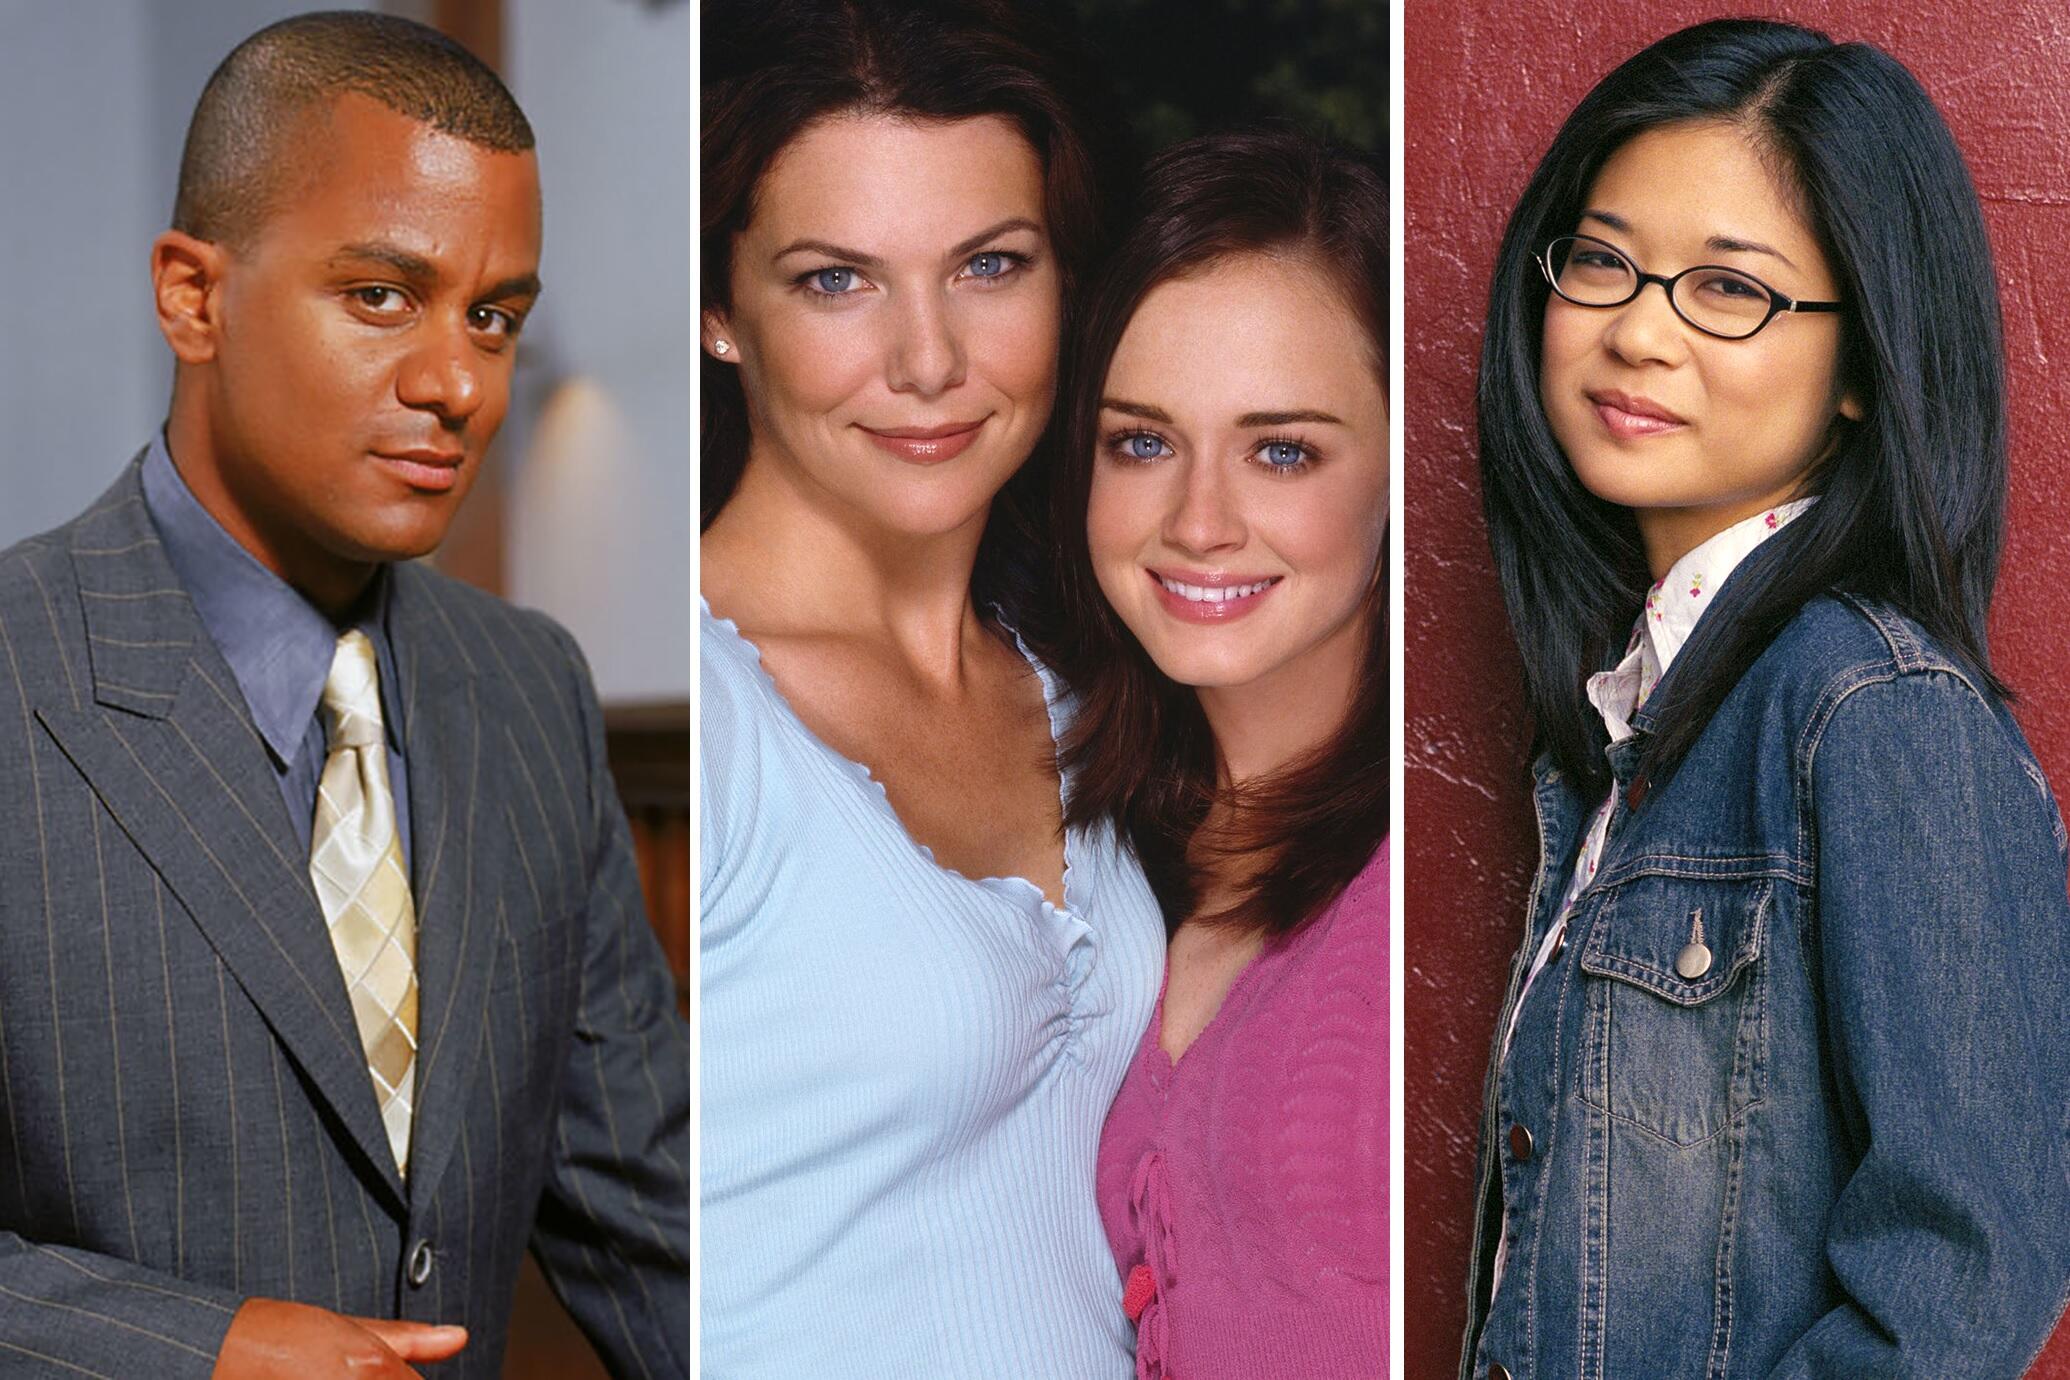 Gilmore Girls' Boyfriends: What the Actors Are Doing Now